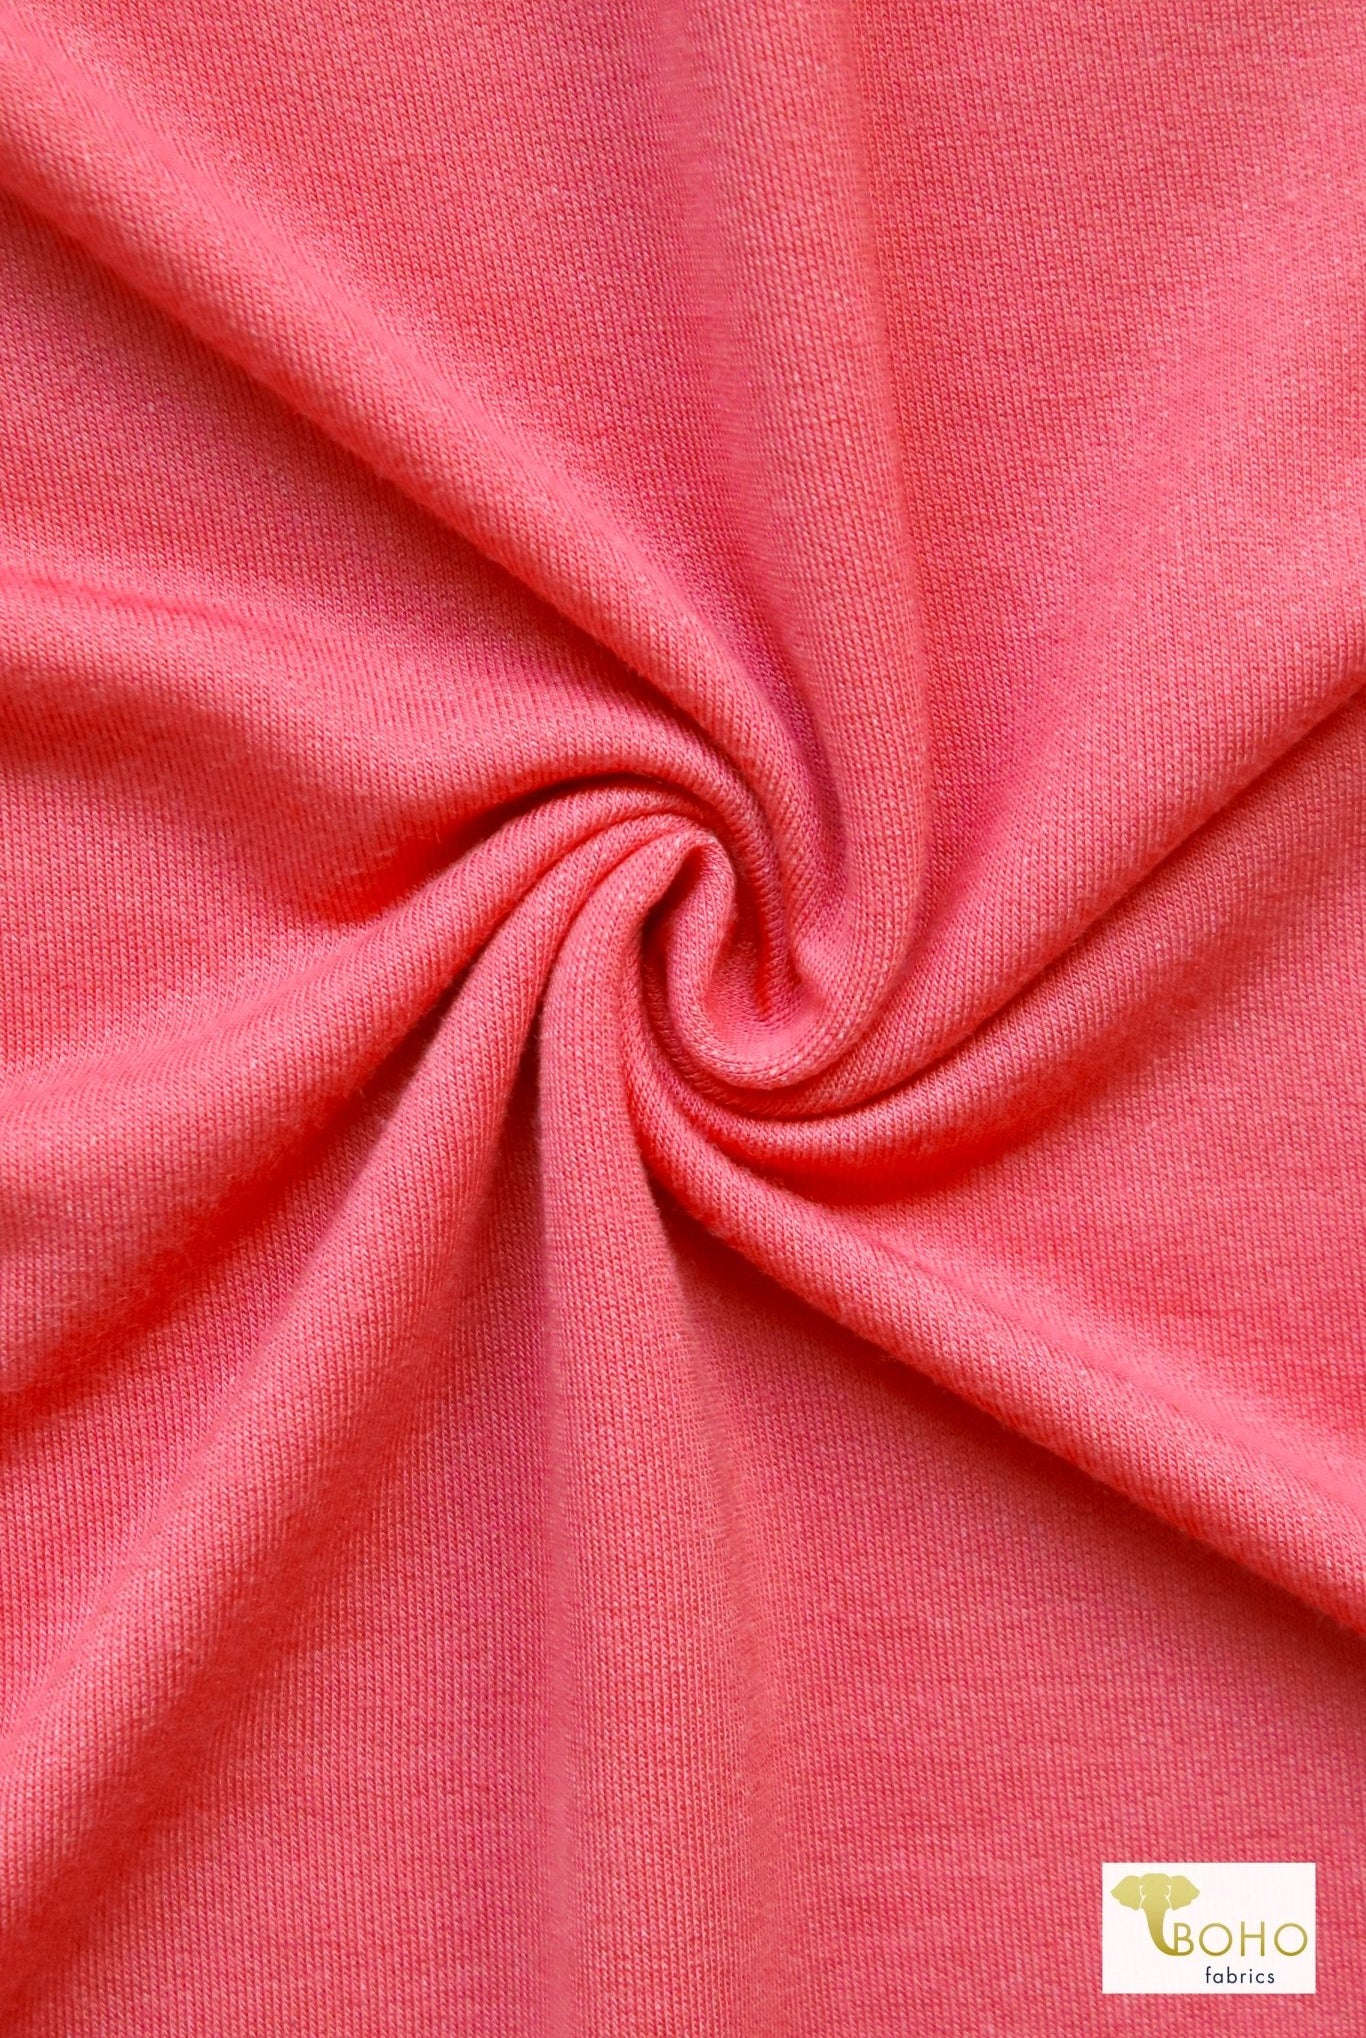 Geranium Pink, Baby French Terry Knit Fabric - Boho Fabrics - French Terry Solid Knit